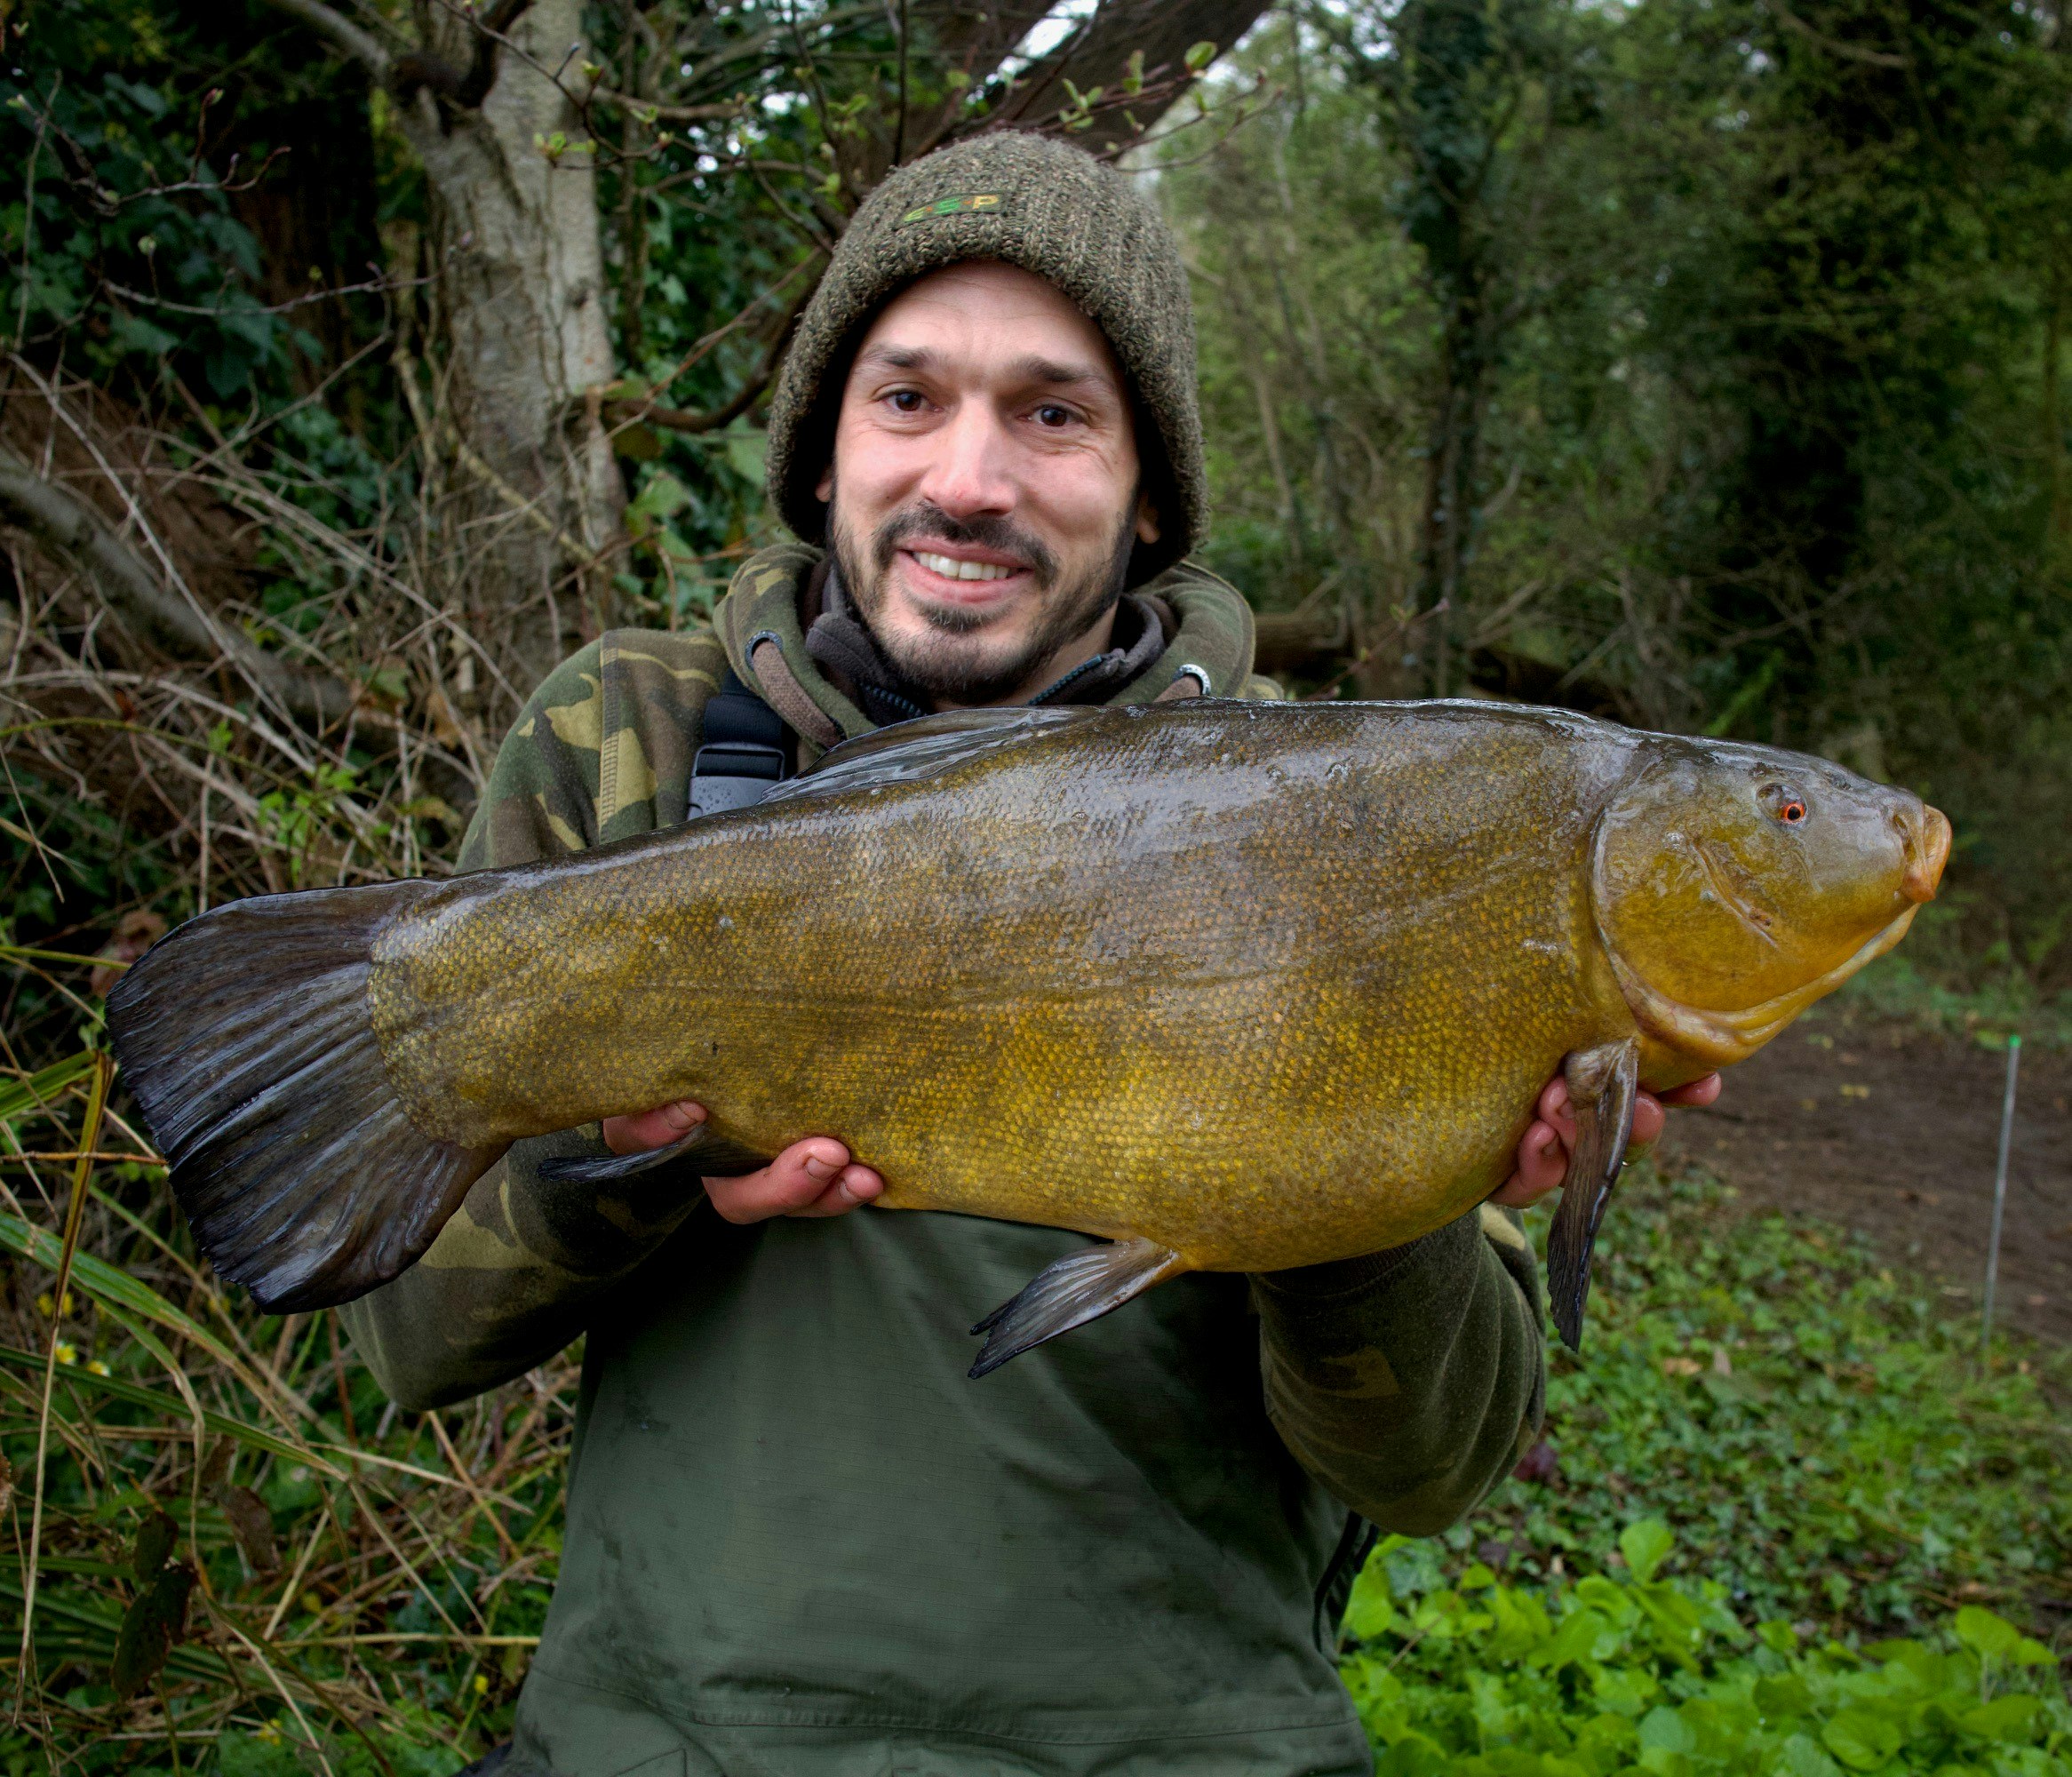 The tench that helped Daniel win the Drennan Cup.